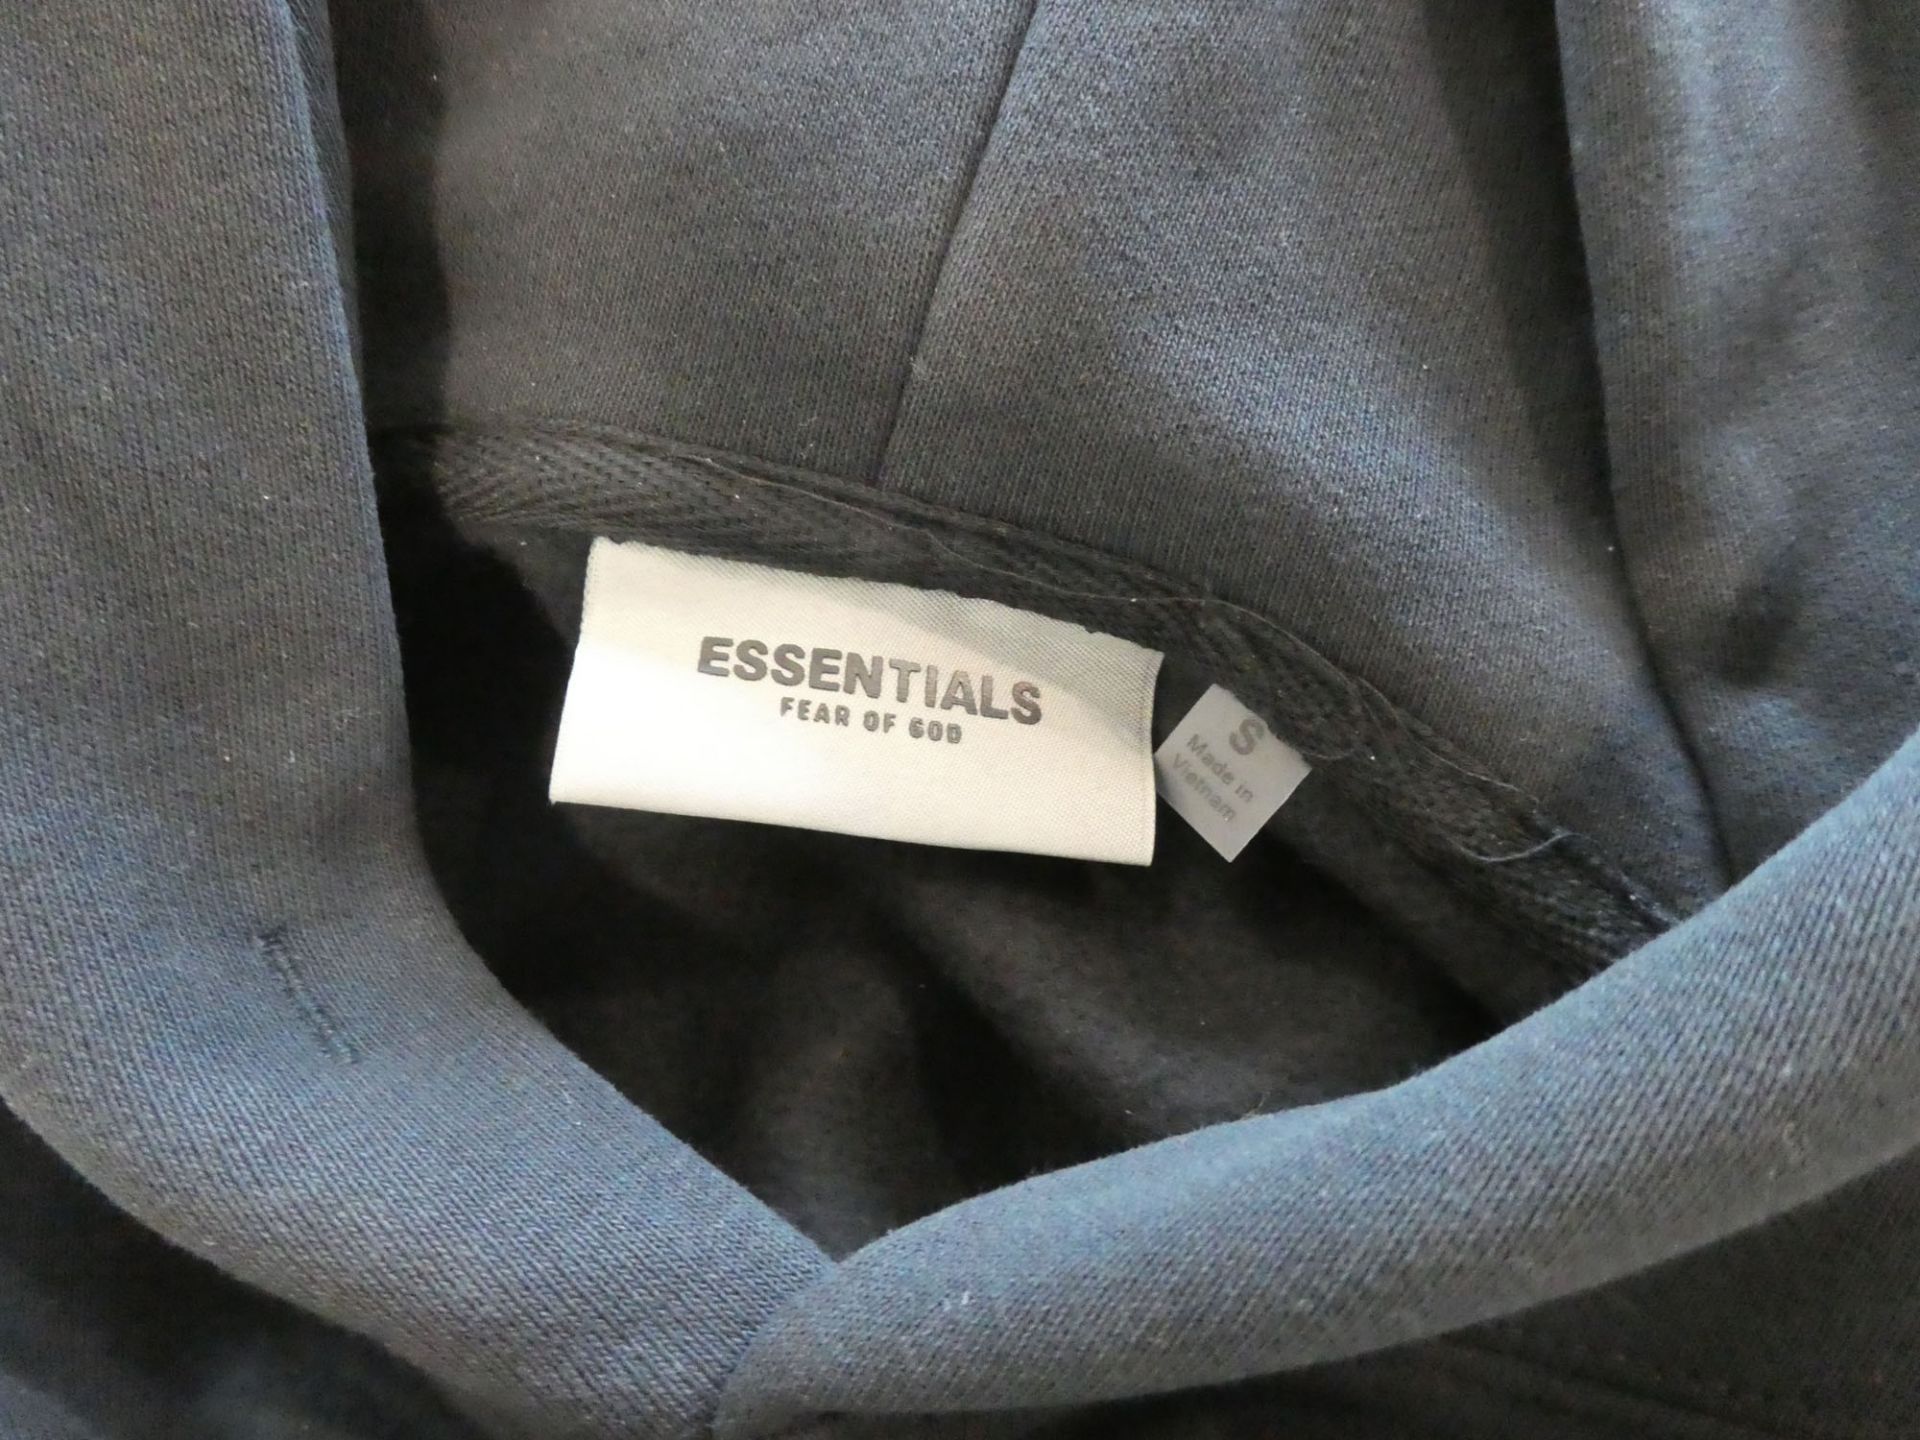 Essentials Fear of God hoodie in black size S - Image 4 of 5